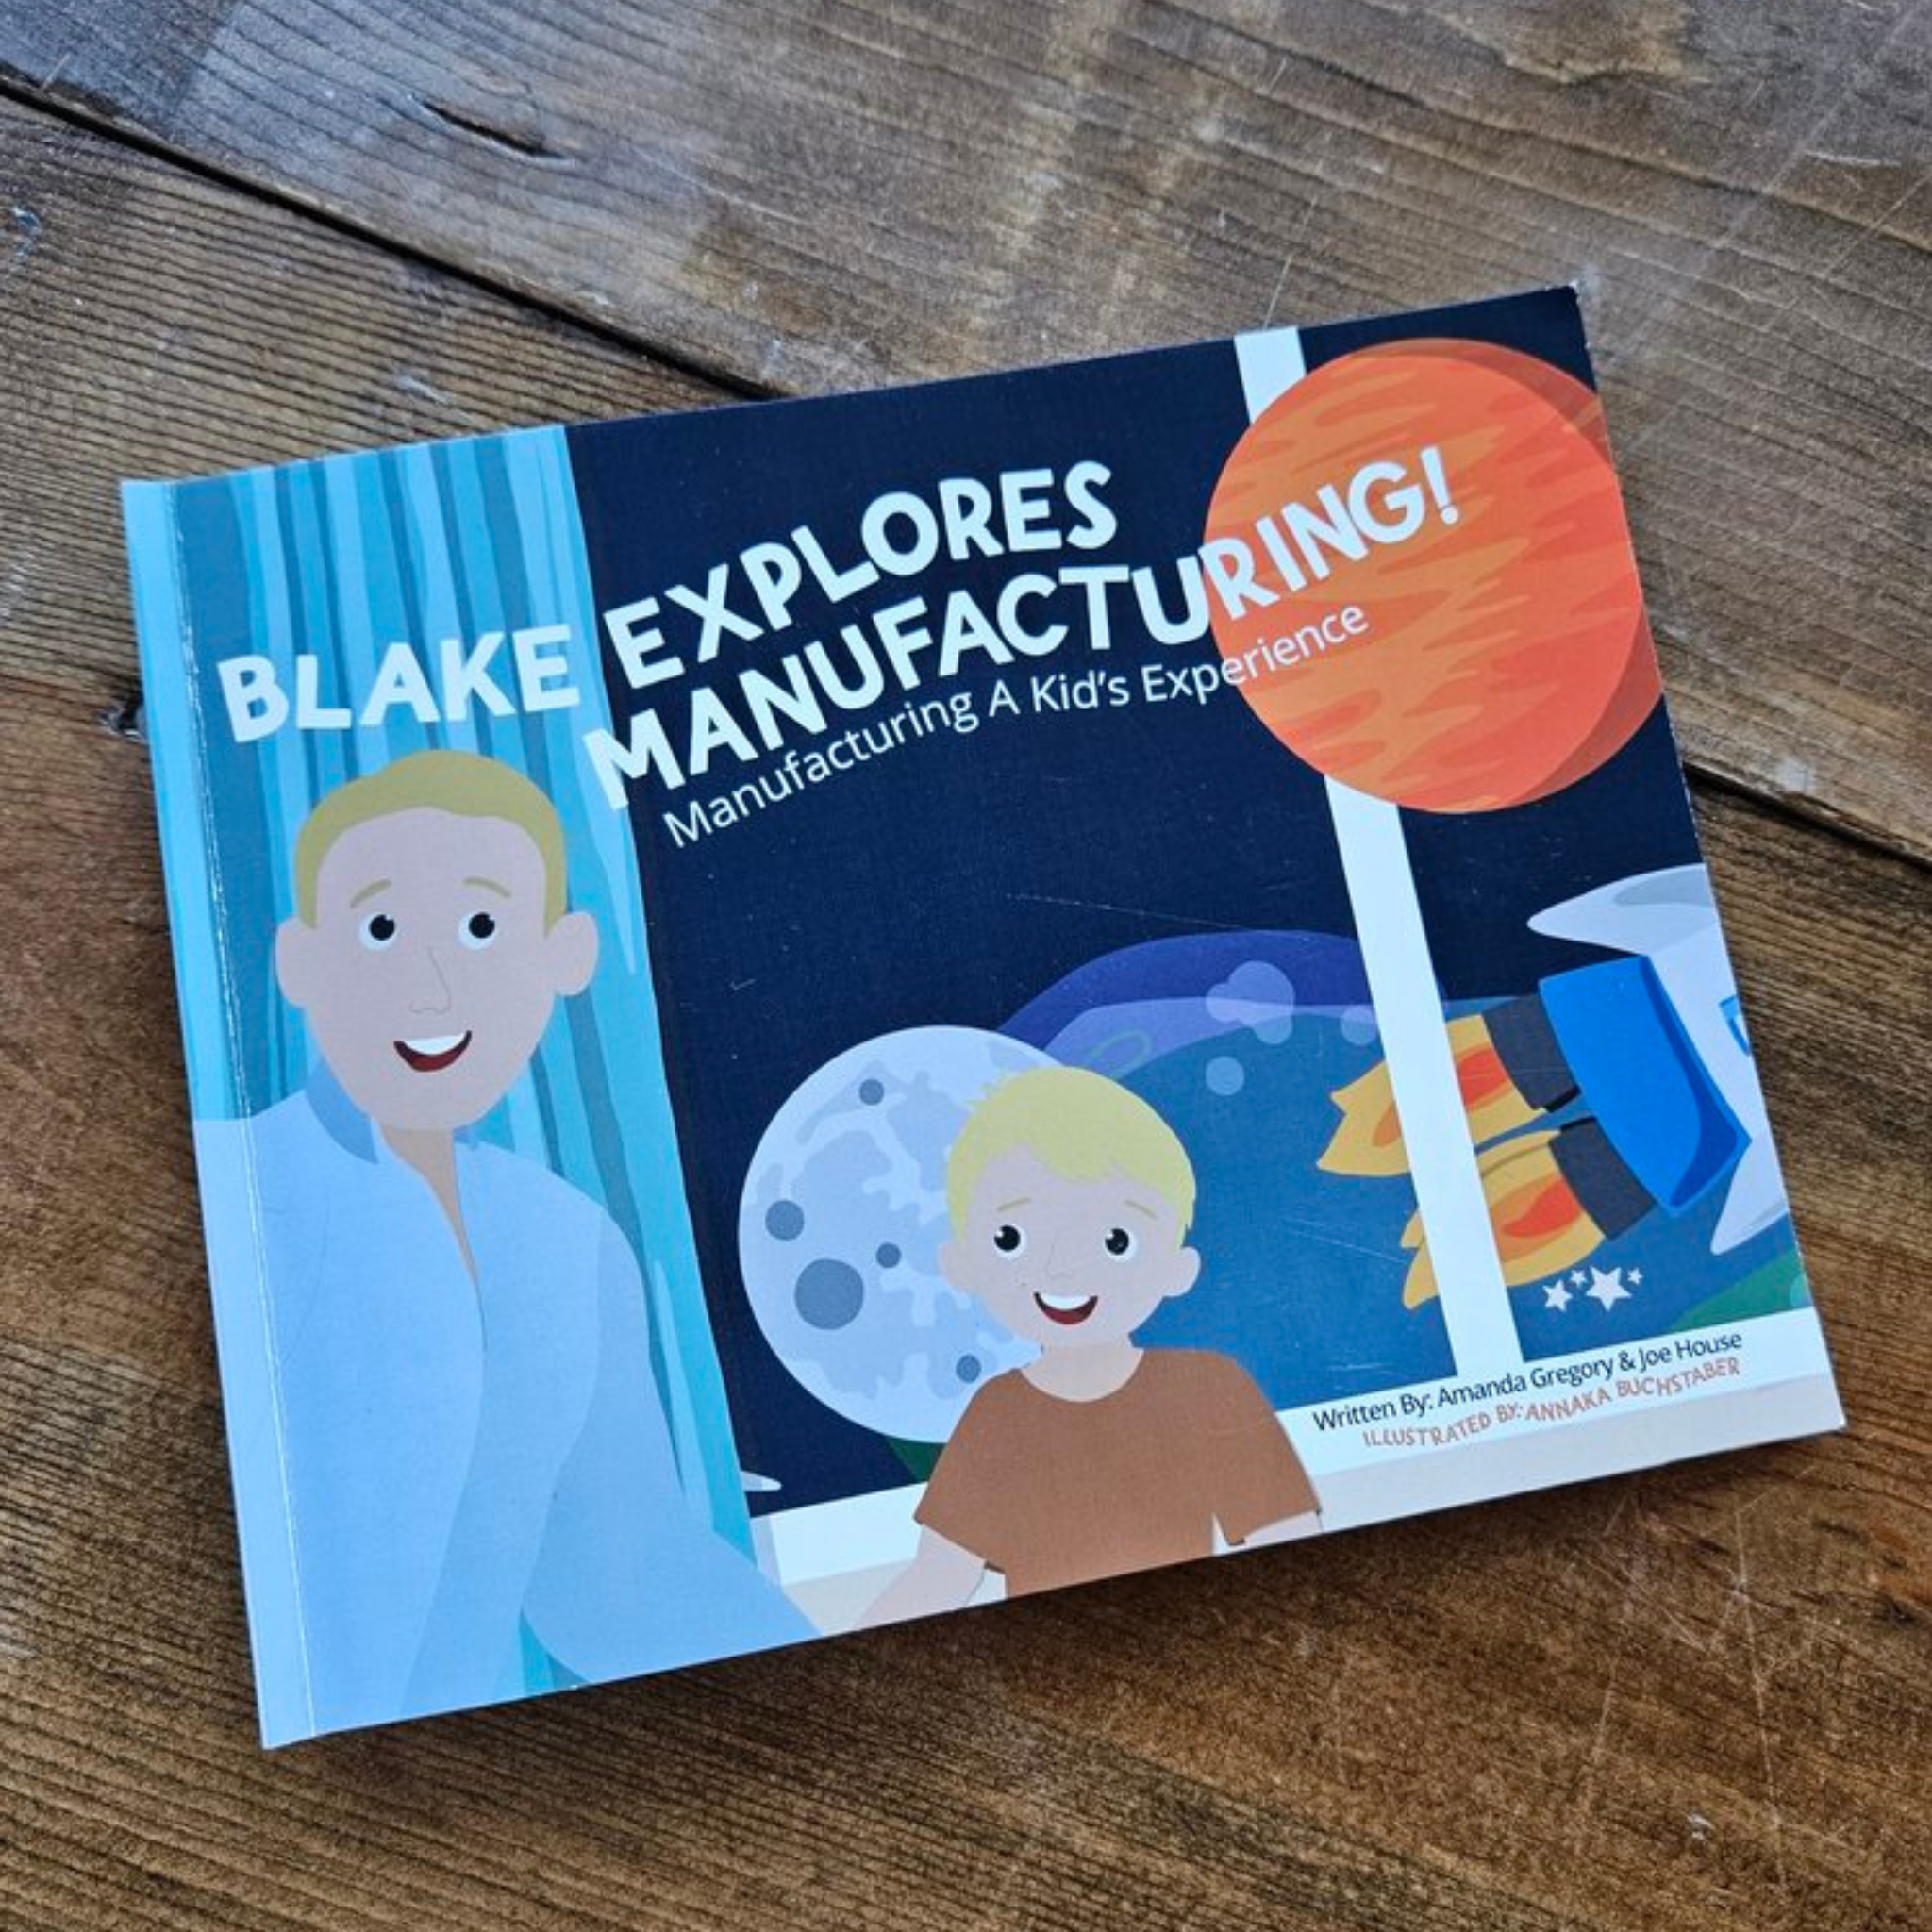 An image of a Self published book called Blake Explores Manufacturing by Amanda Gregory and Joe House